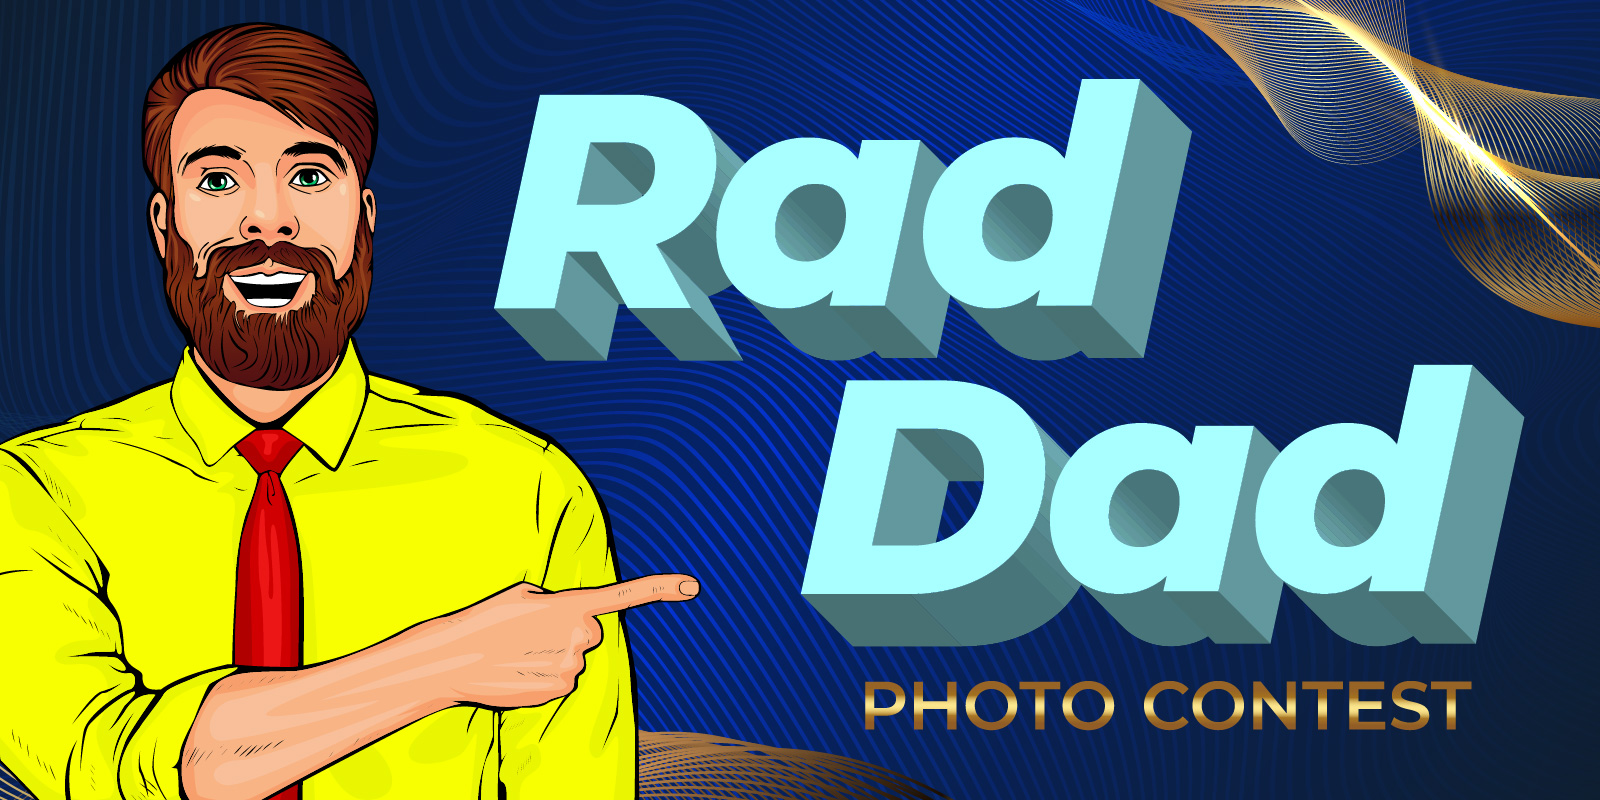 Celebrate Father’s Day with the $500 ‘Rad Dad’ Photo Contest